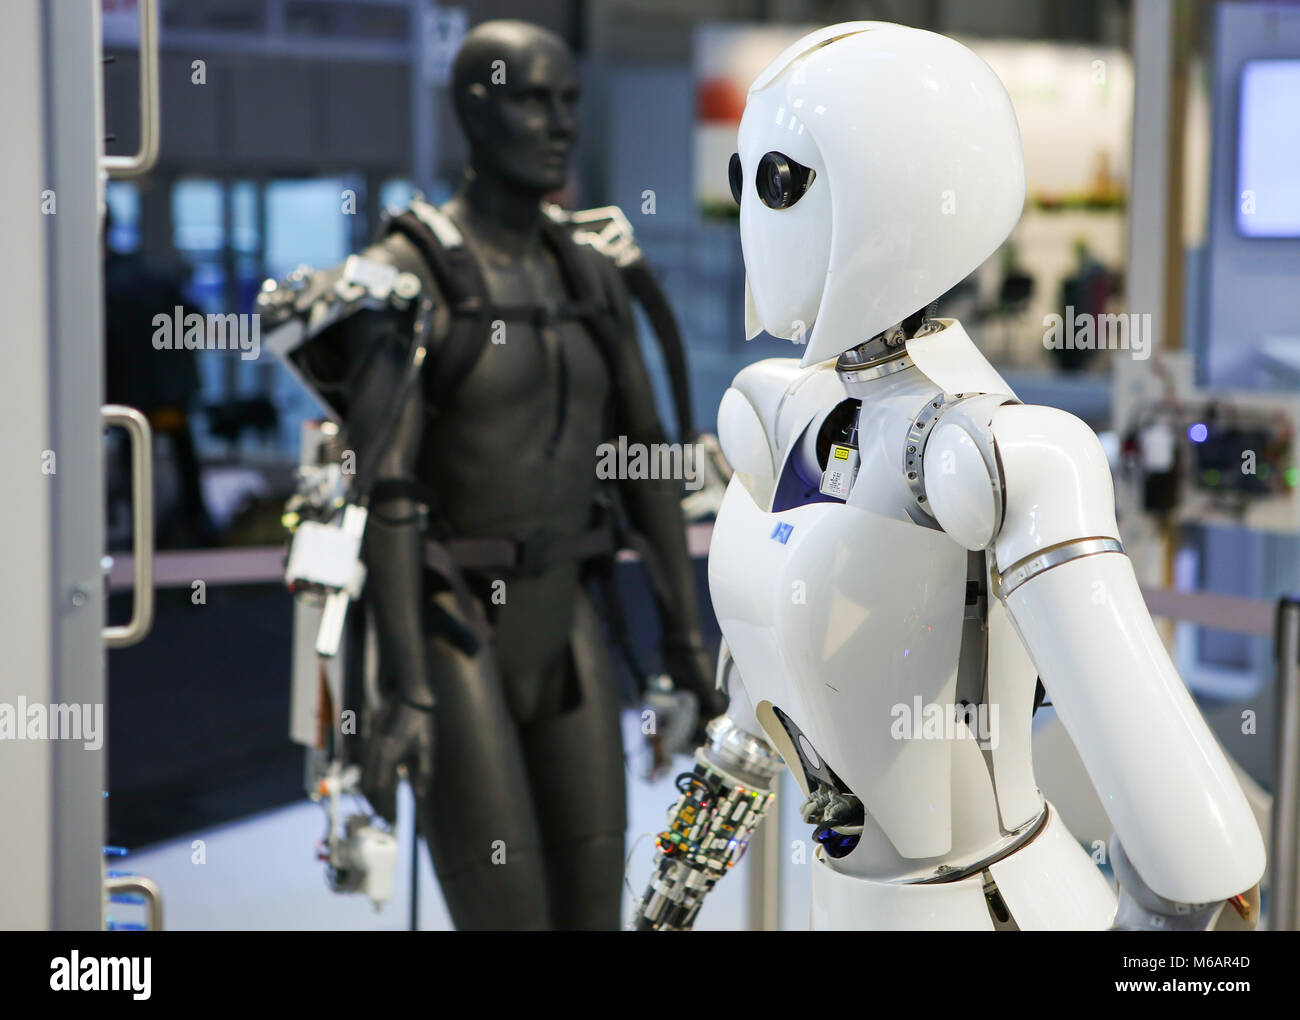 Hanover, Germany. 20th March, 2017. CeBIT 2017, ICT trade fair: robot AILA, a mobile dual-arm robot system, developed as a research platform for investigating aspects of the multidisciplinary area of mobile manipulation, applications: logistics, production and consumer. Developed by German Research Center for Artificial Intelligence and University of Bremen, Germany. Credit: Christian Lademann Stock Photo